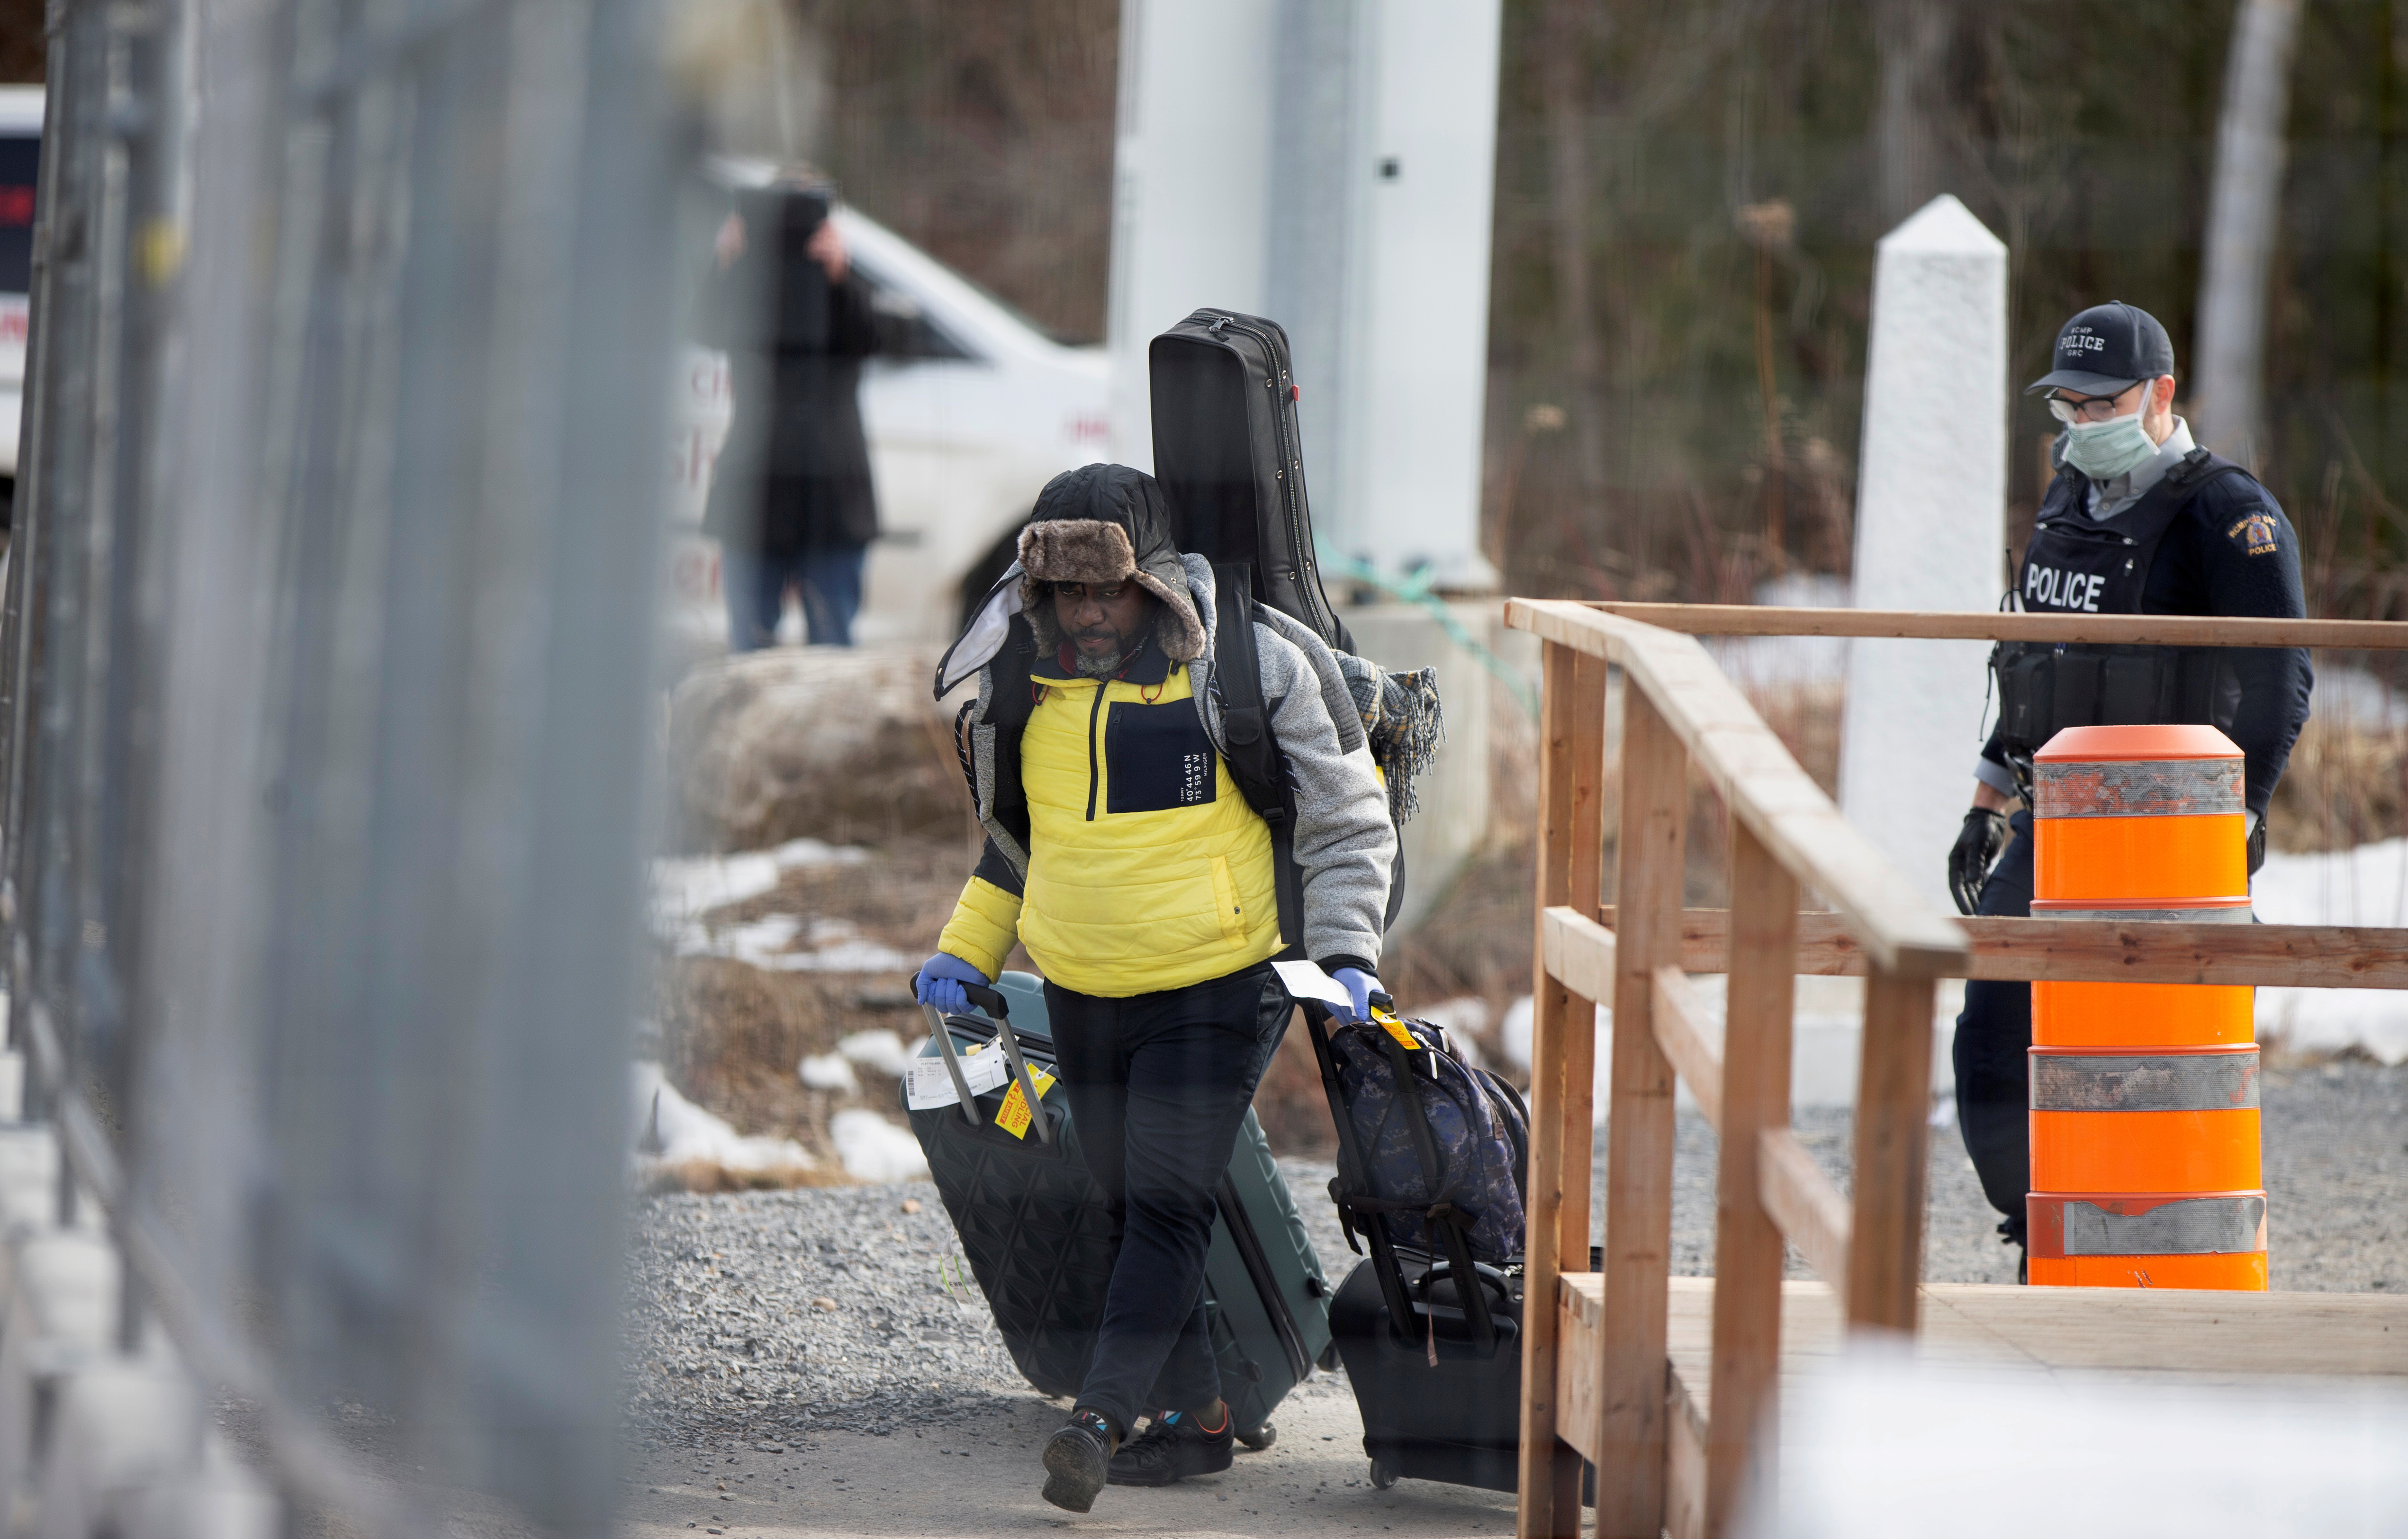 An asylum seeker crosses the border from New York into Canada followed by a Royal Canadian Mounted Police (RCMP) officer at Roxham Road in Hemmingford, Quebec, Canada March 18, 2020.  REUTERS/Christinne Muschi/File Photo